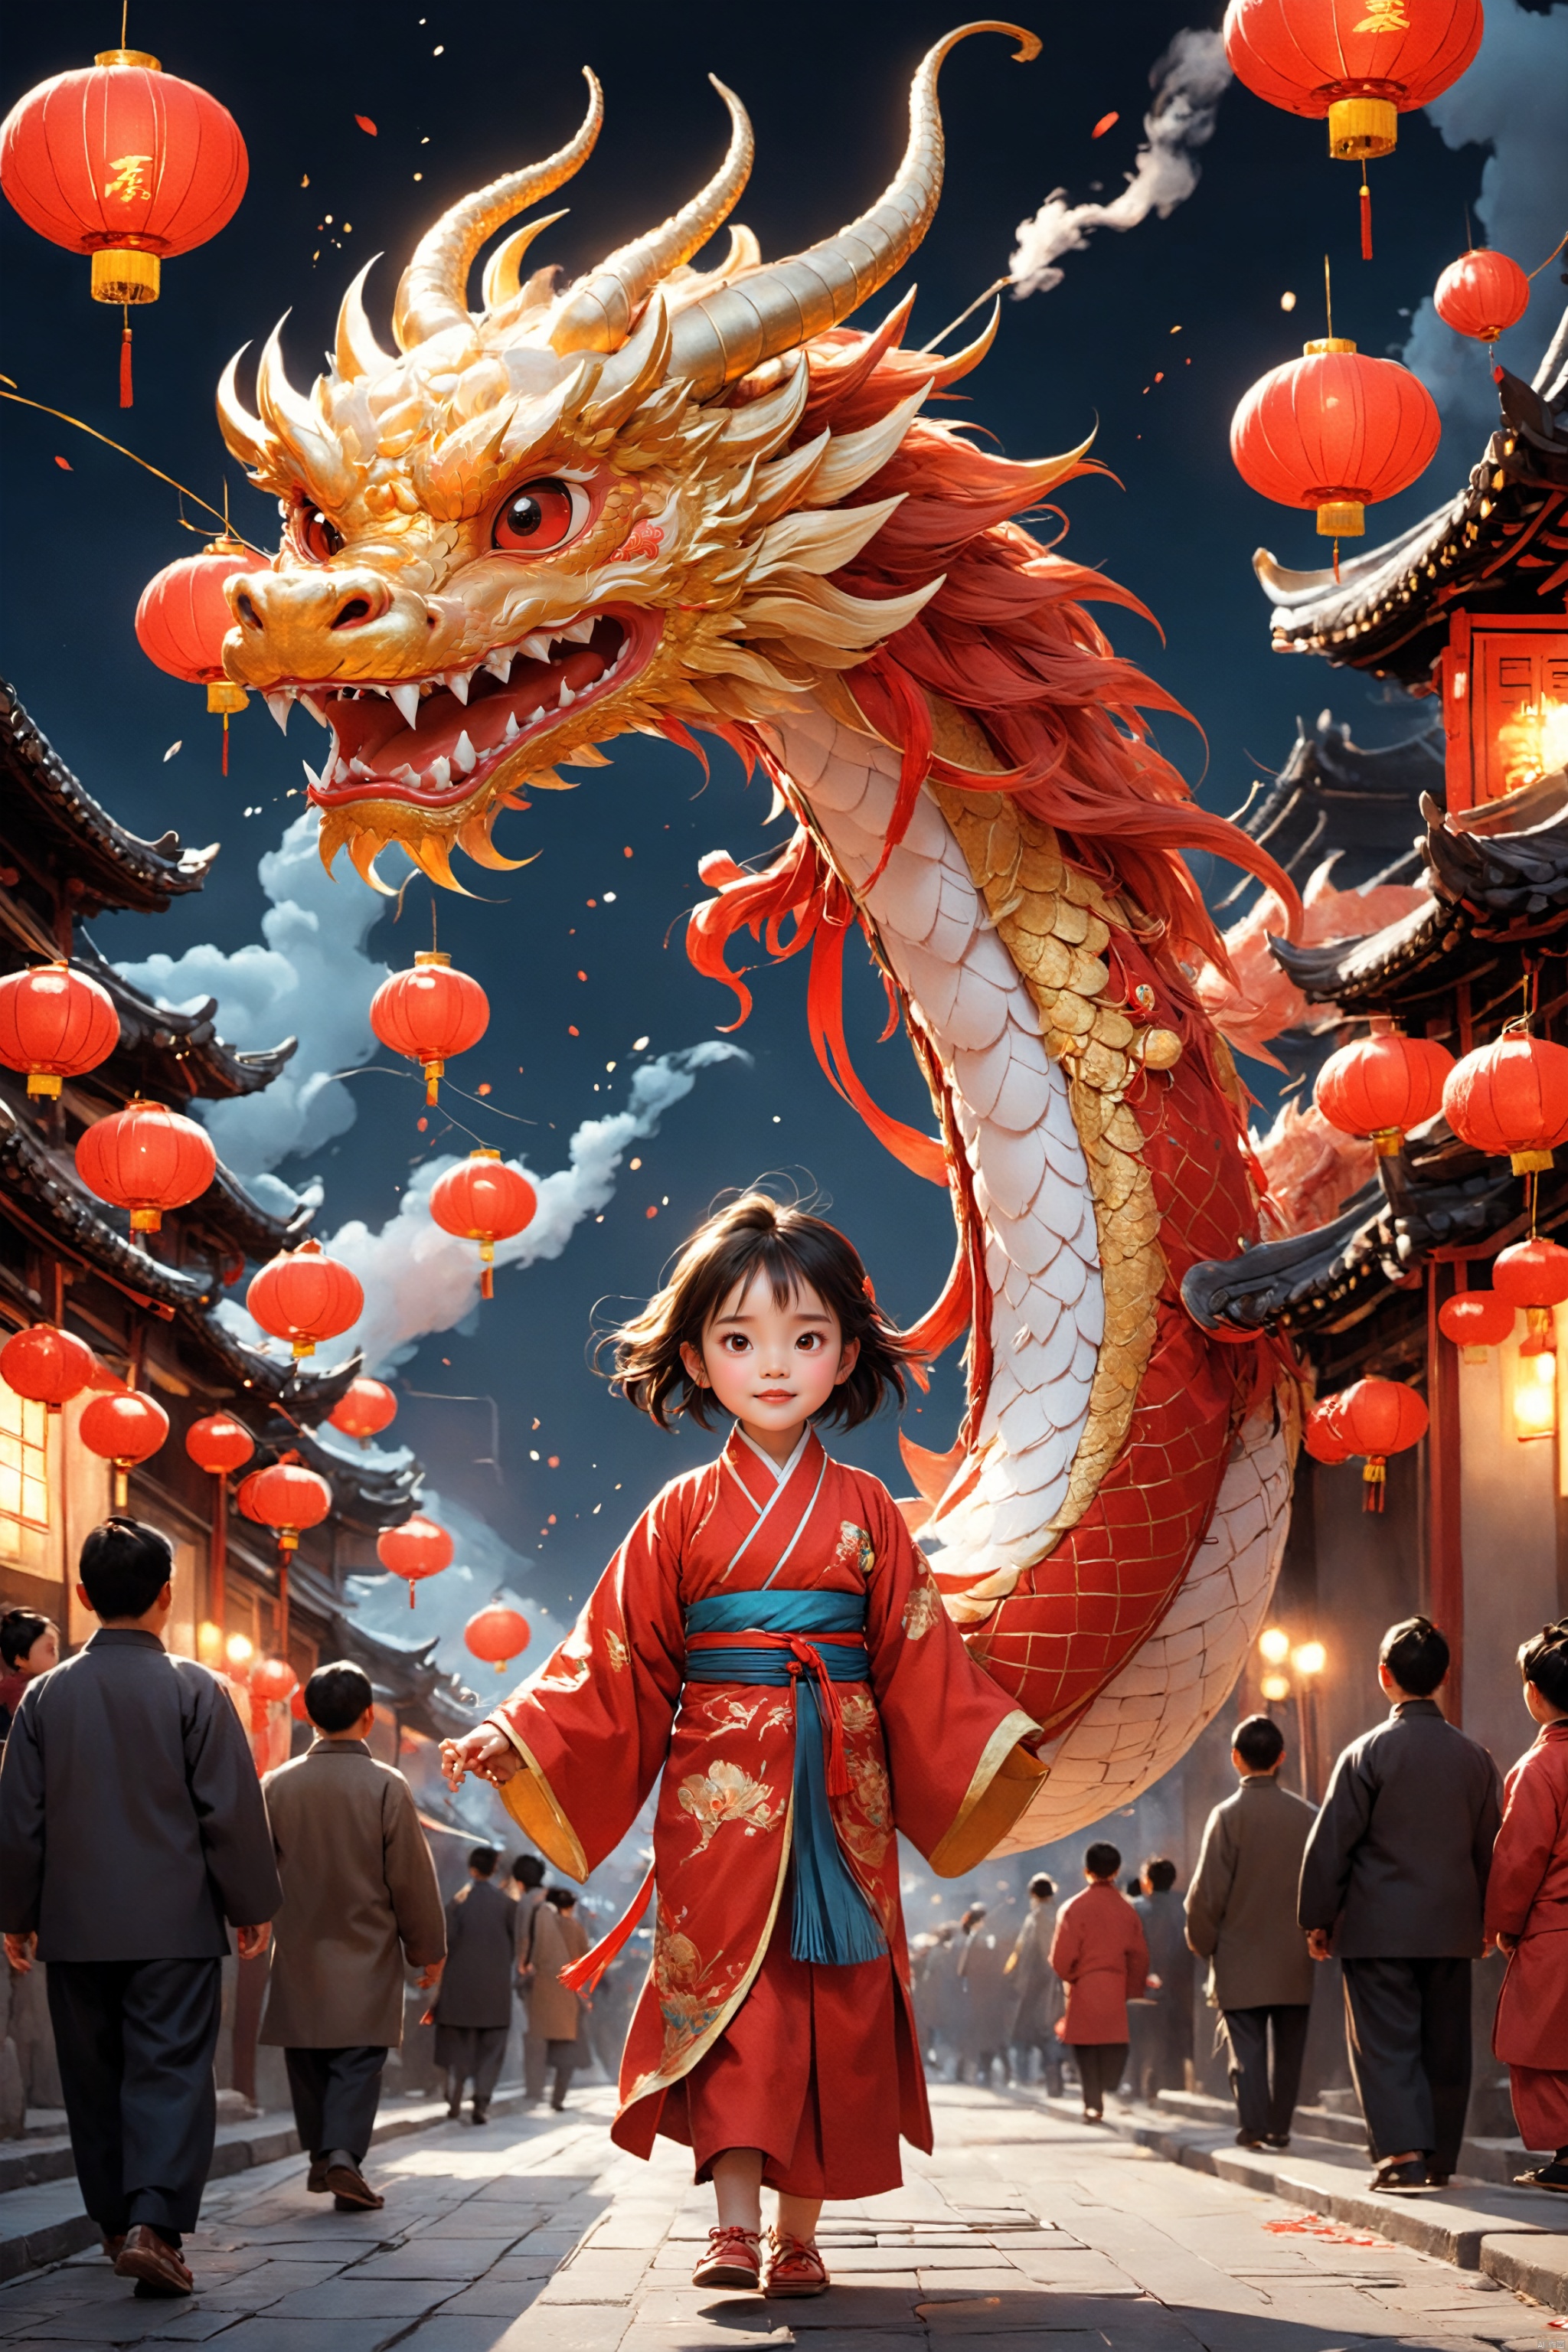  Master works, high-definition art illustrations, excellent quality, New Year&#039;s Eve, fireworks in the night sky, a little girl, a Chinese fu long, only one dragon head, face the audience, the little girl carrying Red Lanterns, lively streets, the celebration was amazing, BJ_Sacred_beast_Illustration